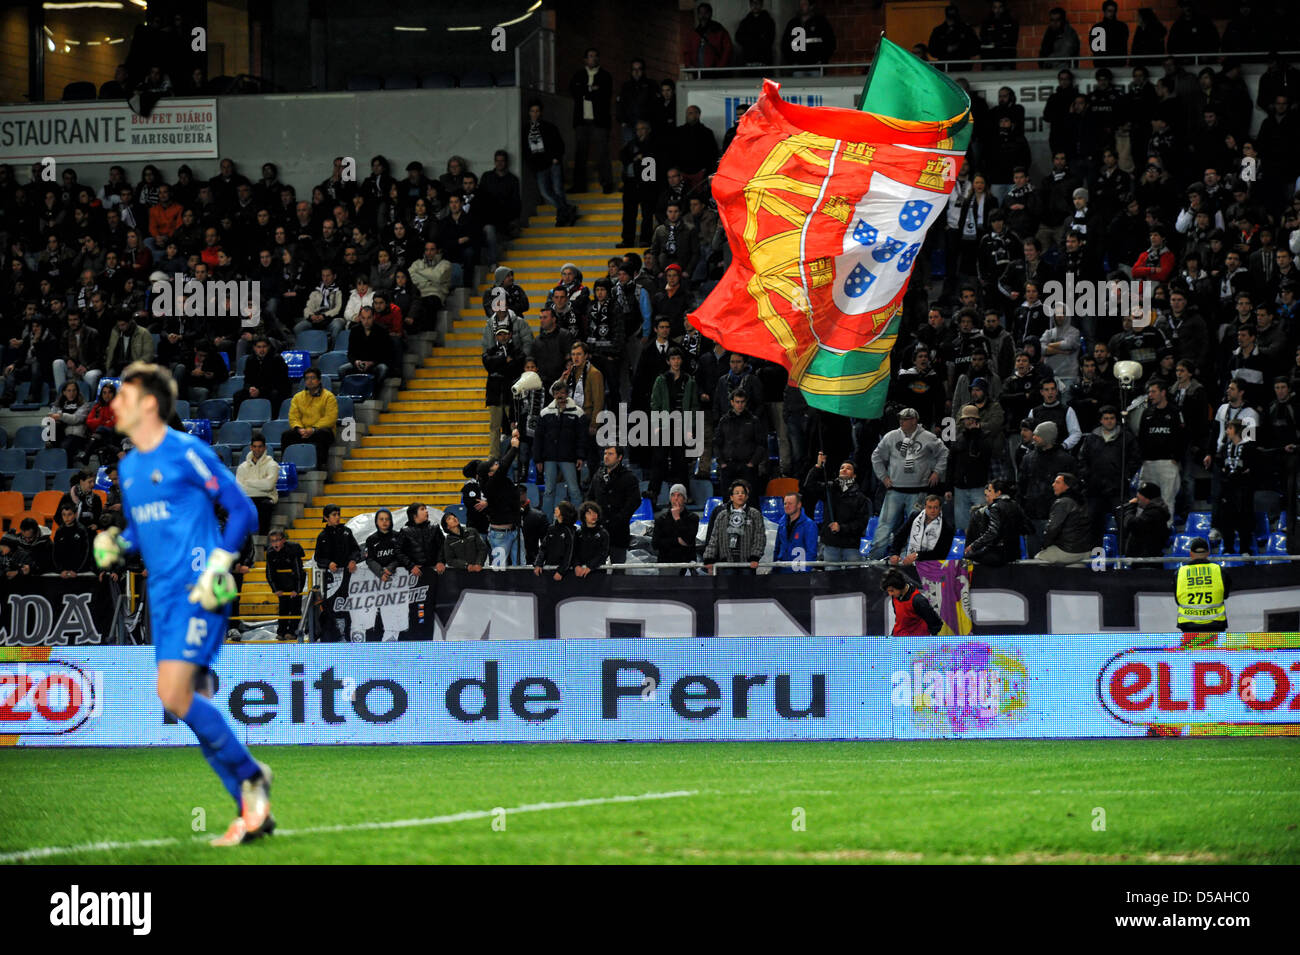 Fans waving giant portuguese flag in the stands during a football game Stock Photo